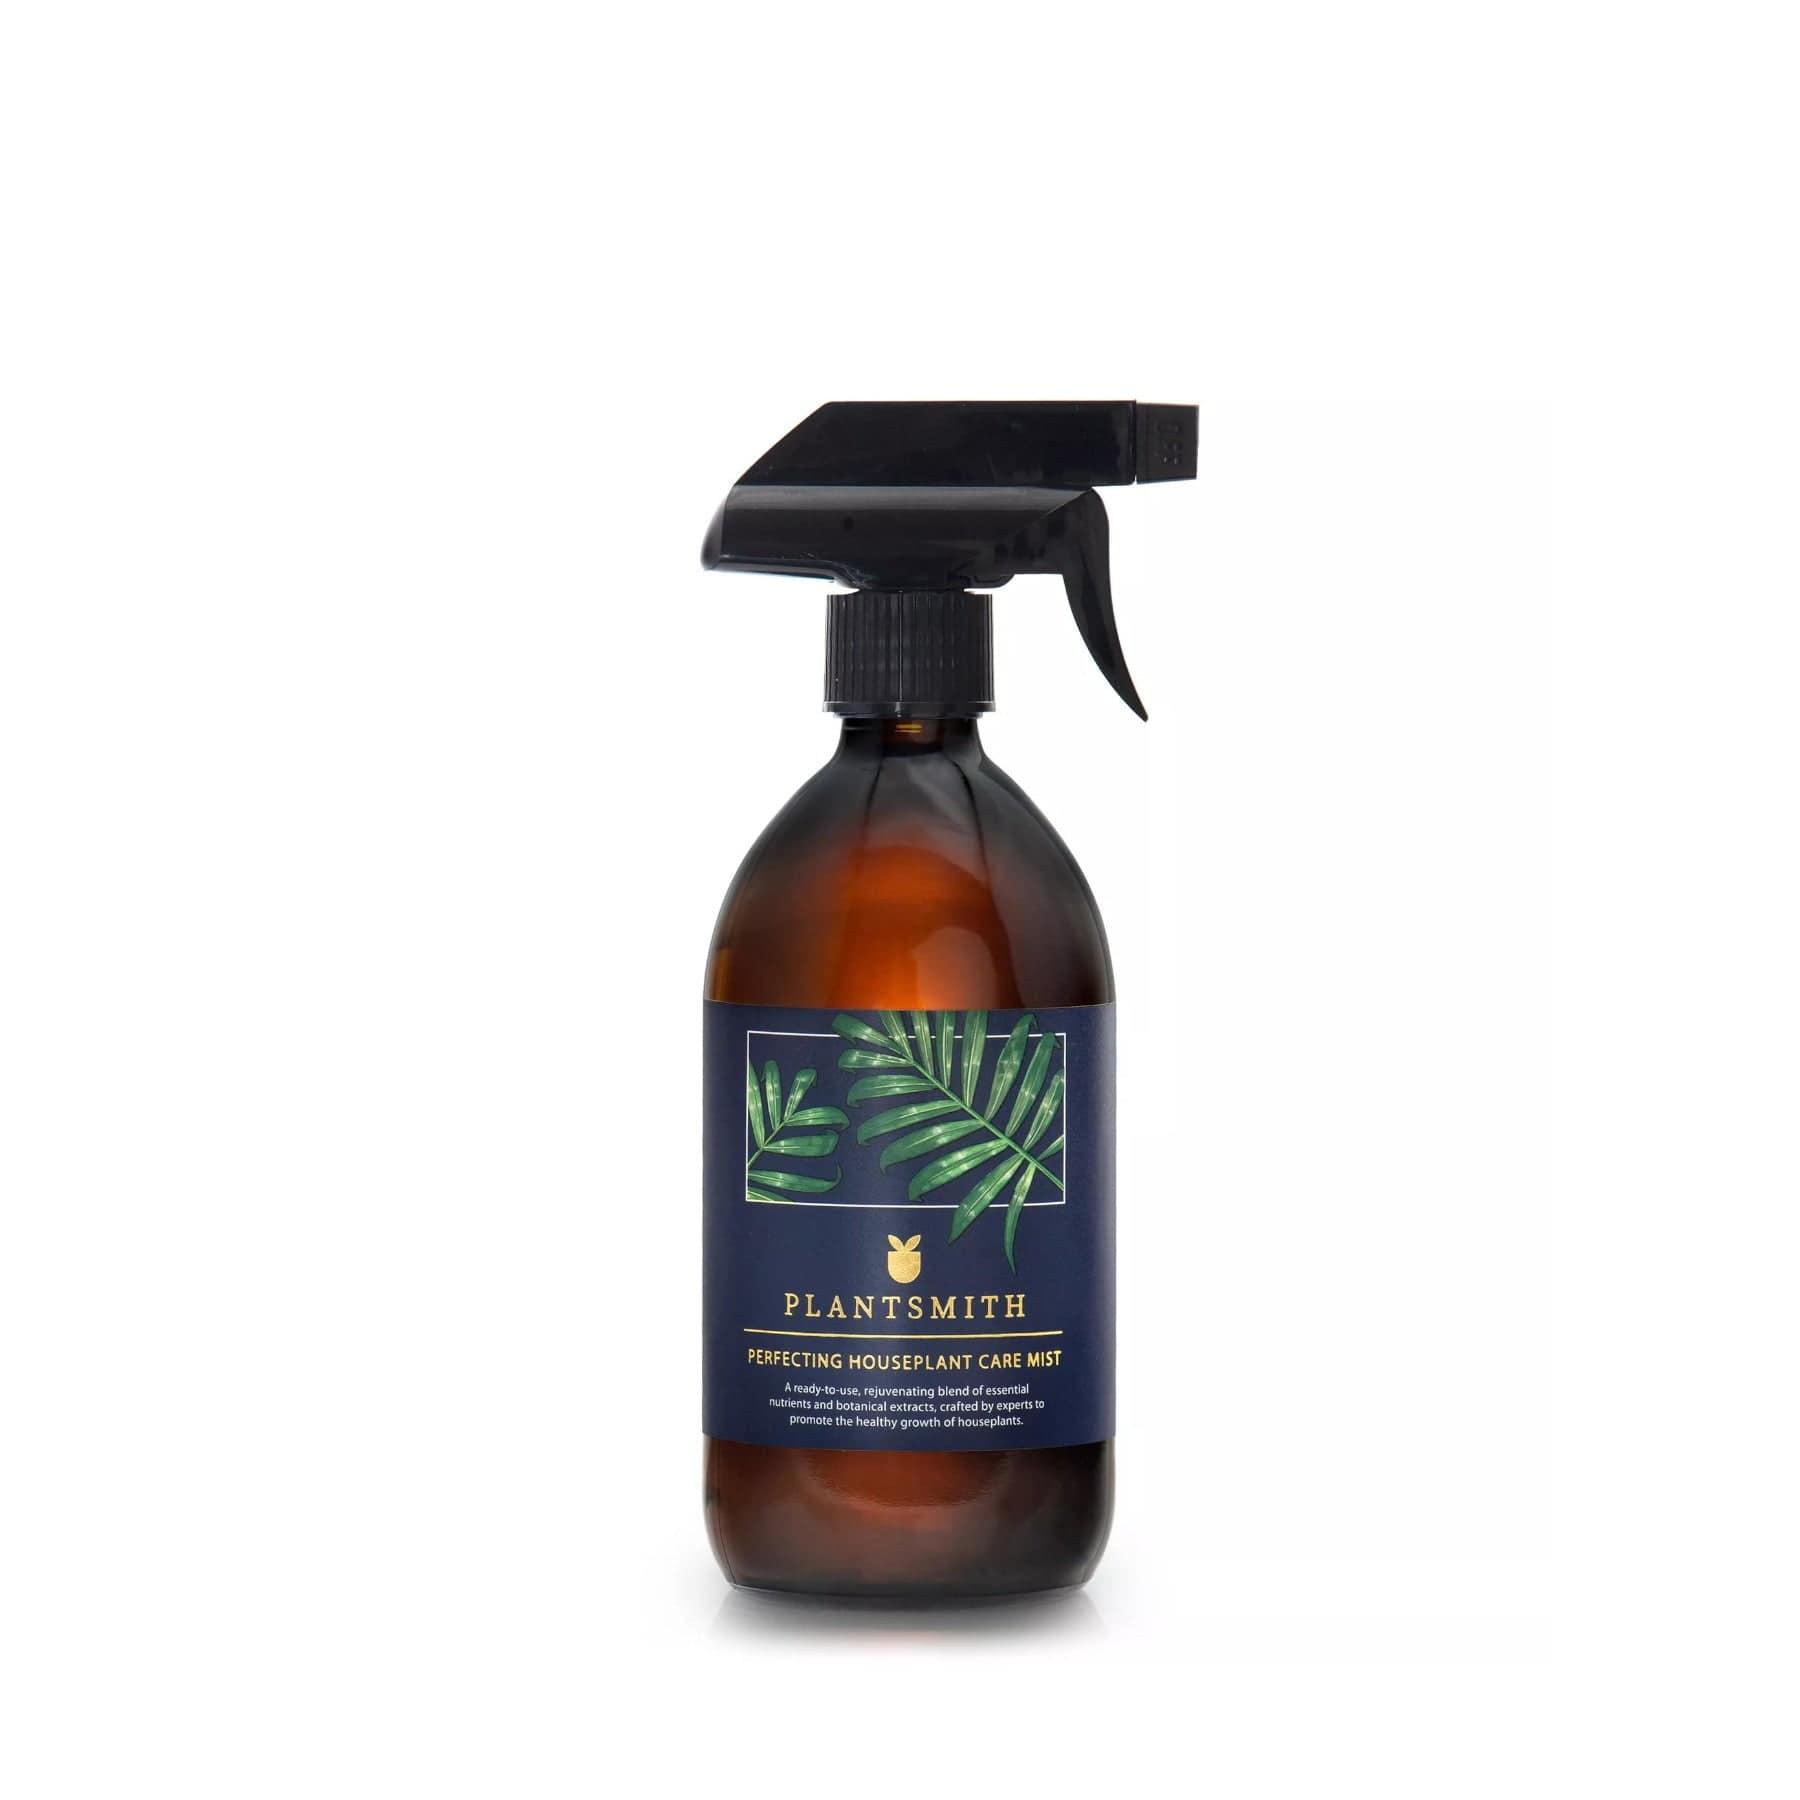 Amber glass bottle of Plantsmith Perfecting Houseplant Care Mist with a black spray nozzle on an isolated white background